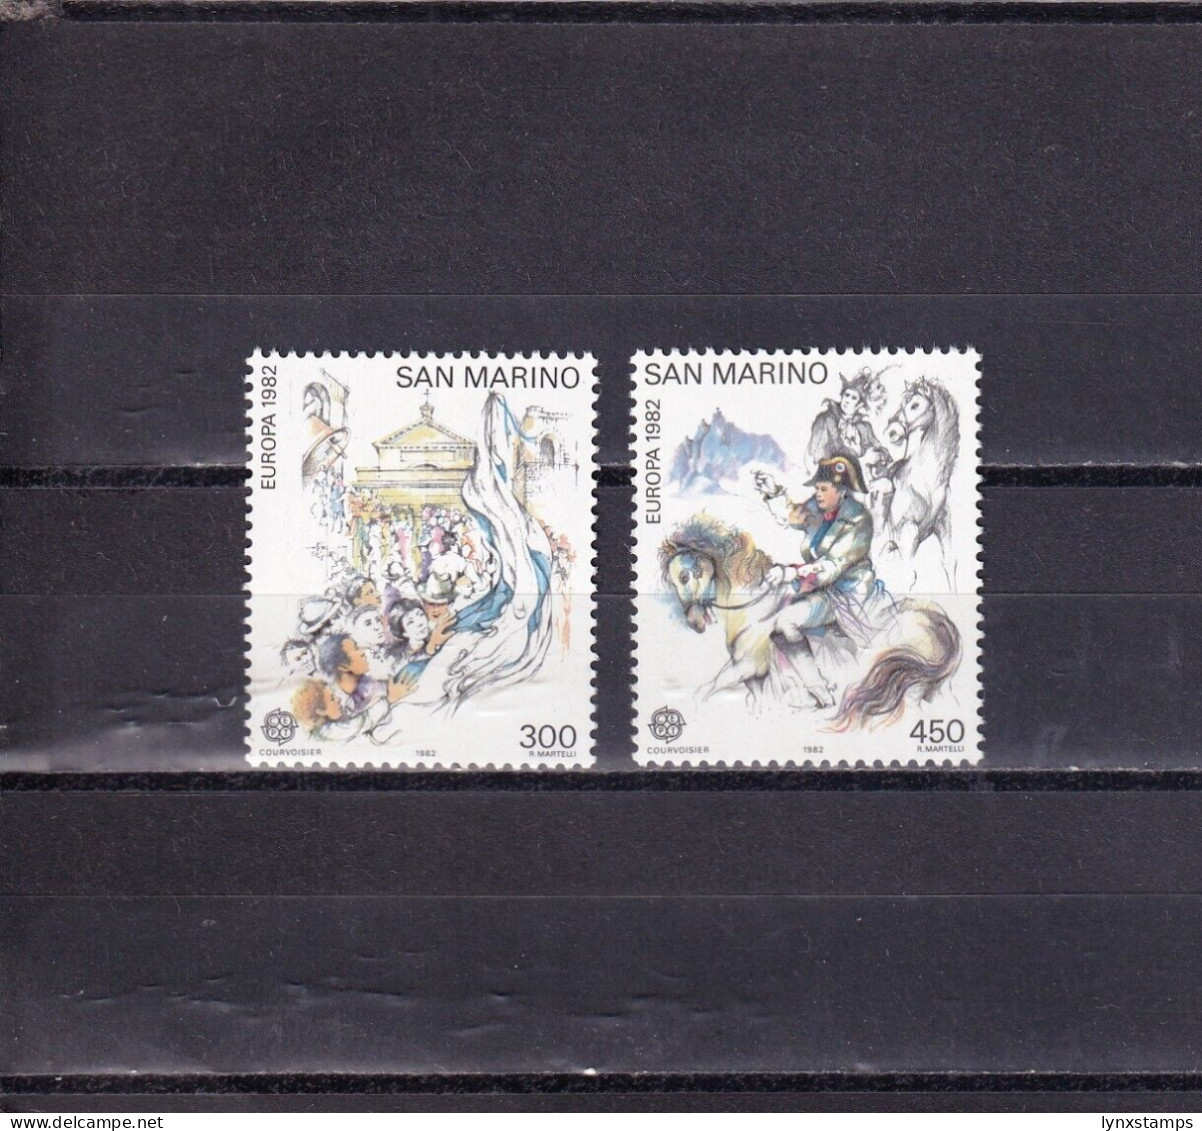 SA04 San Marino 1982 EUROPA Stamps - Historic Events Mint Stamps - Unused Stamps